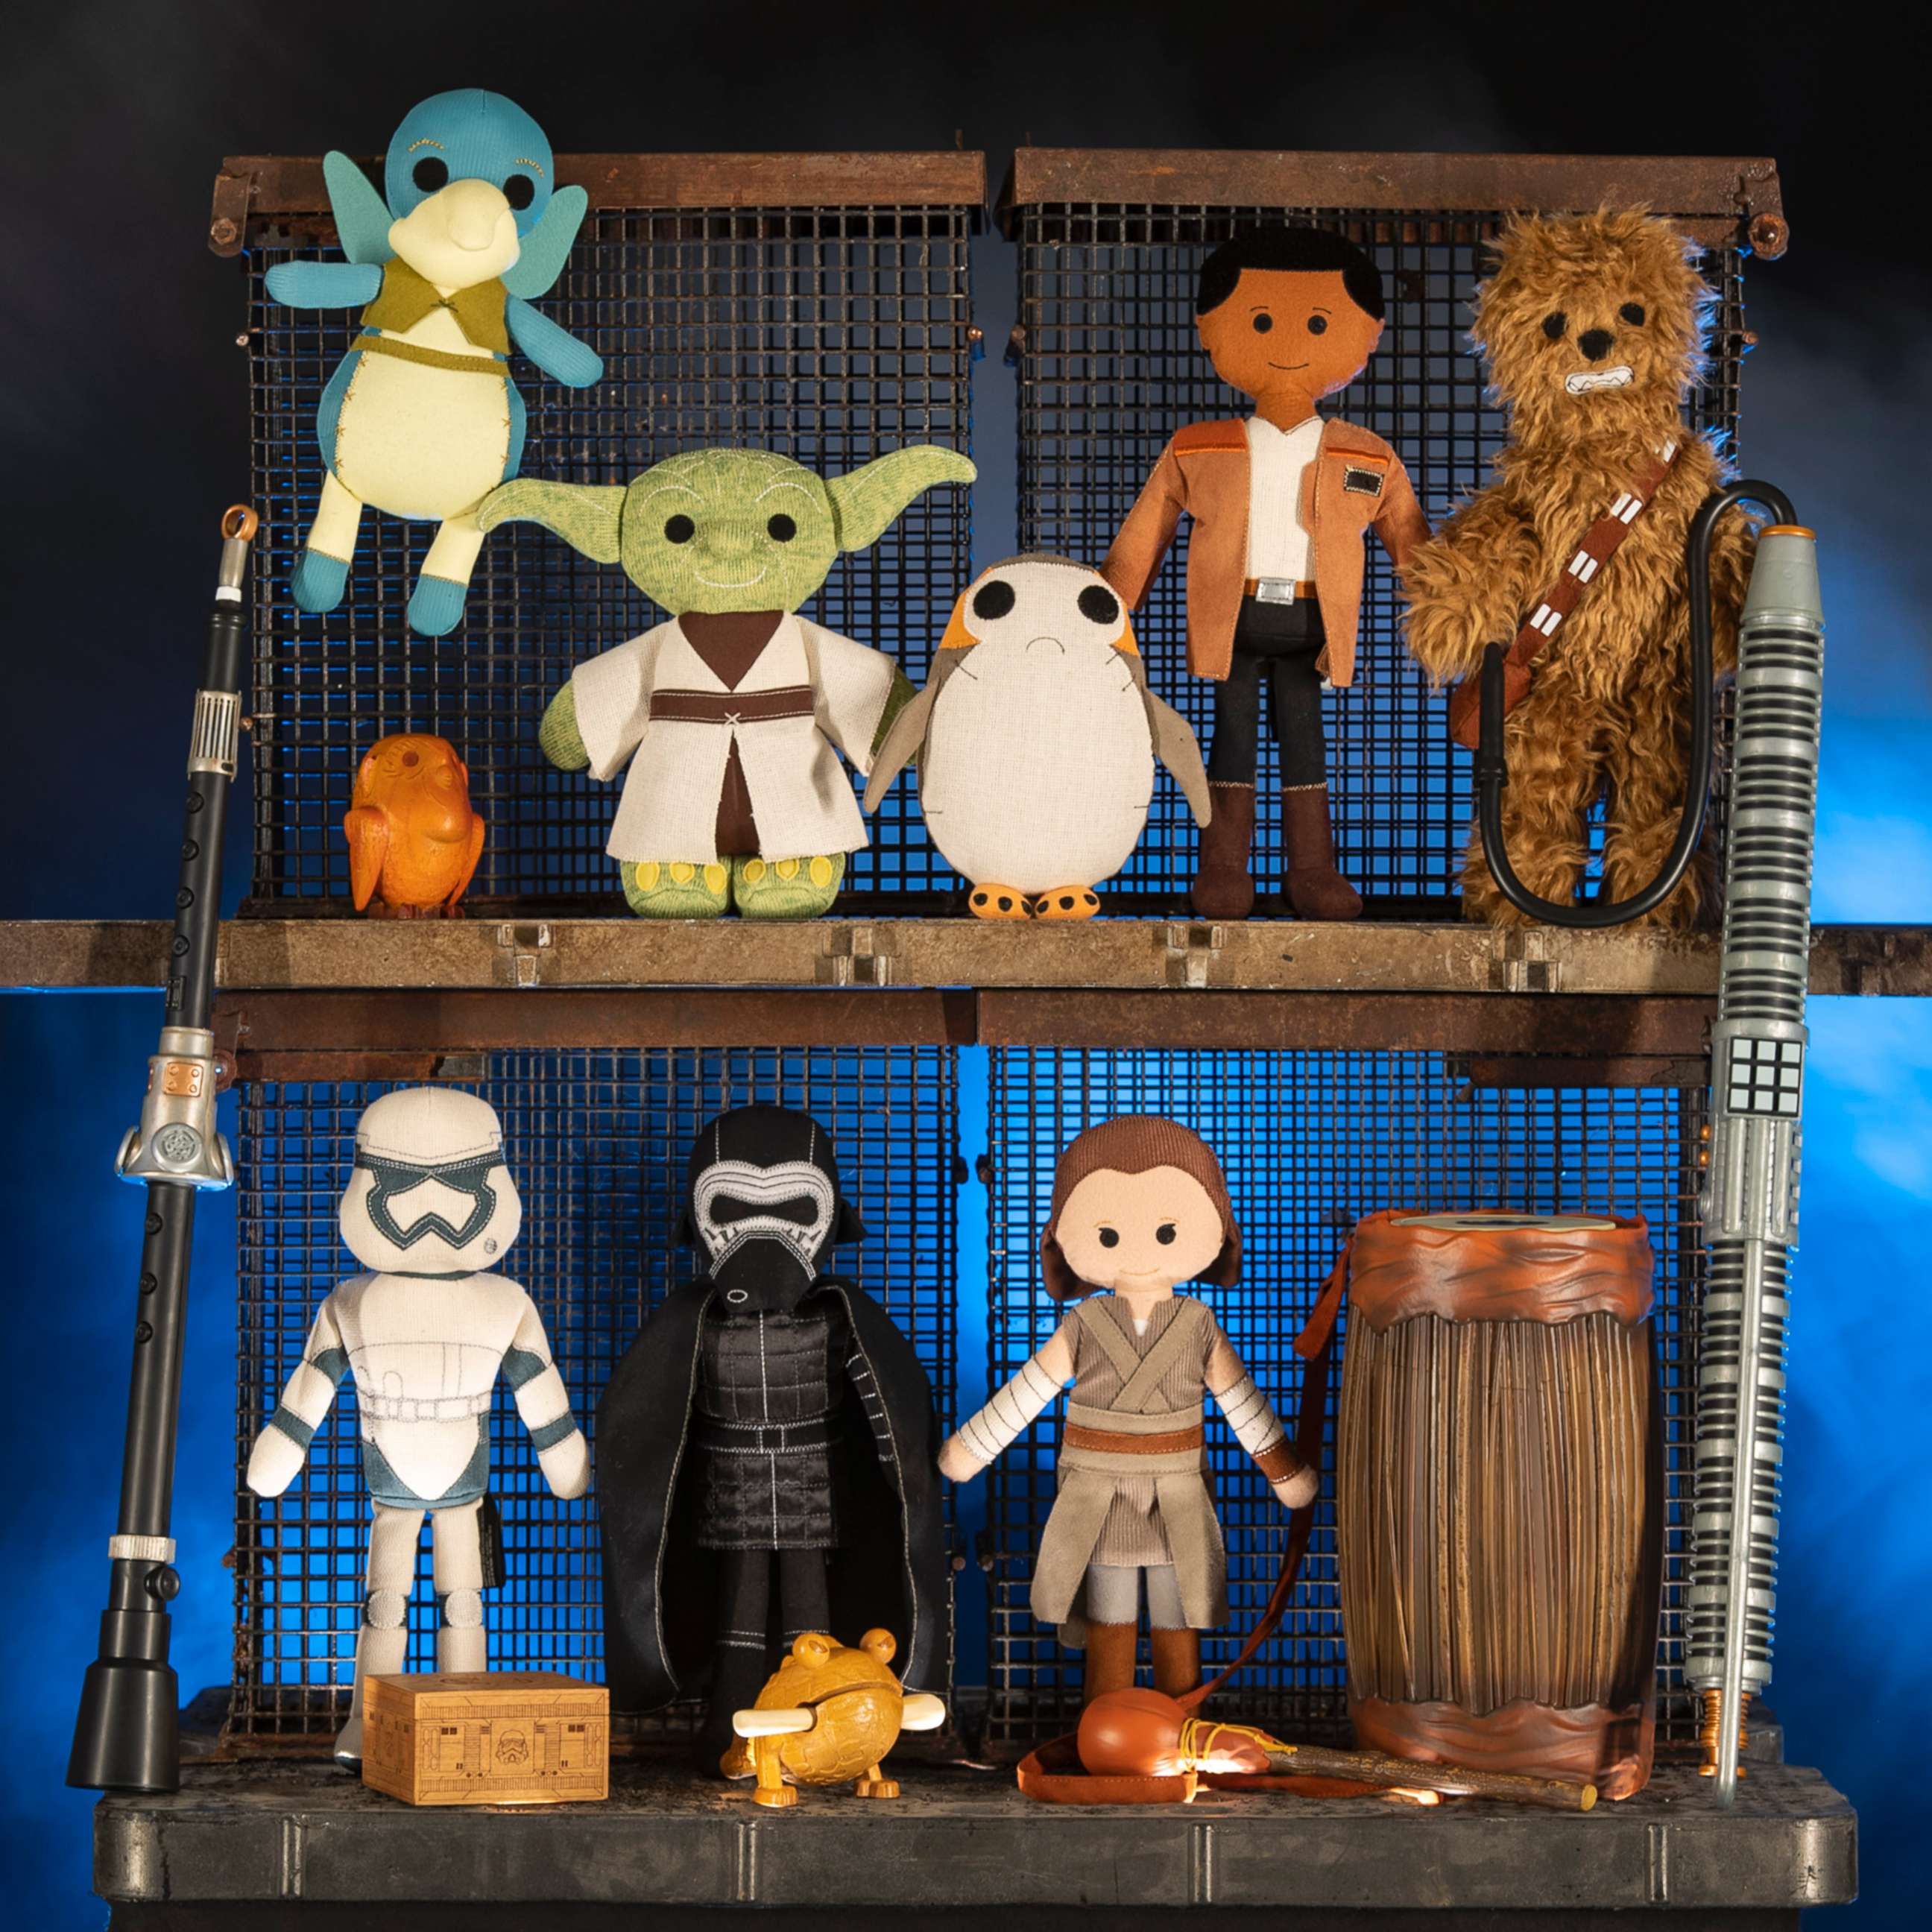 PHOTO: The Toydarian Toymaker stall in Star Wars